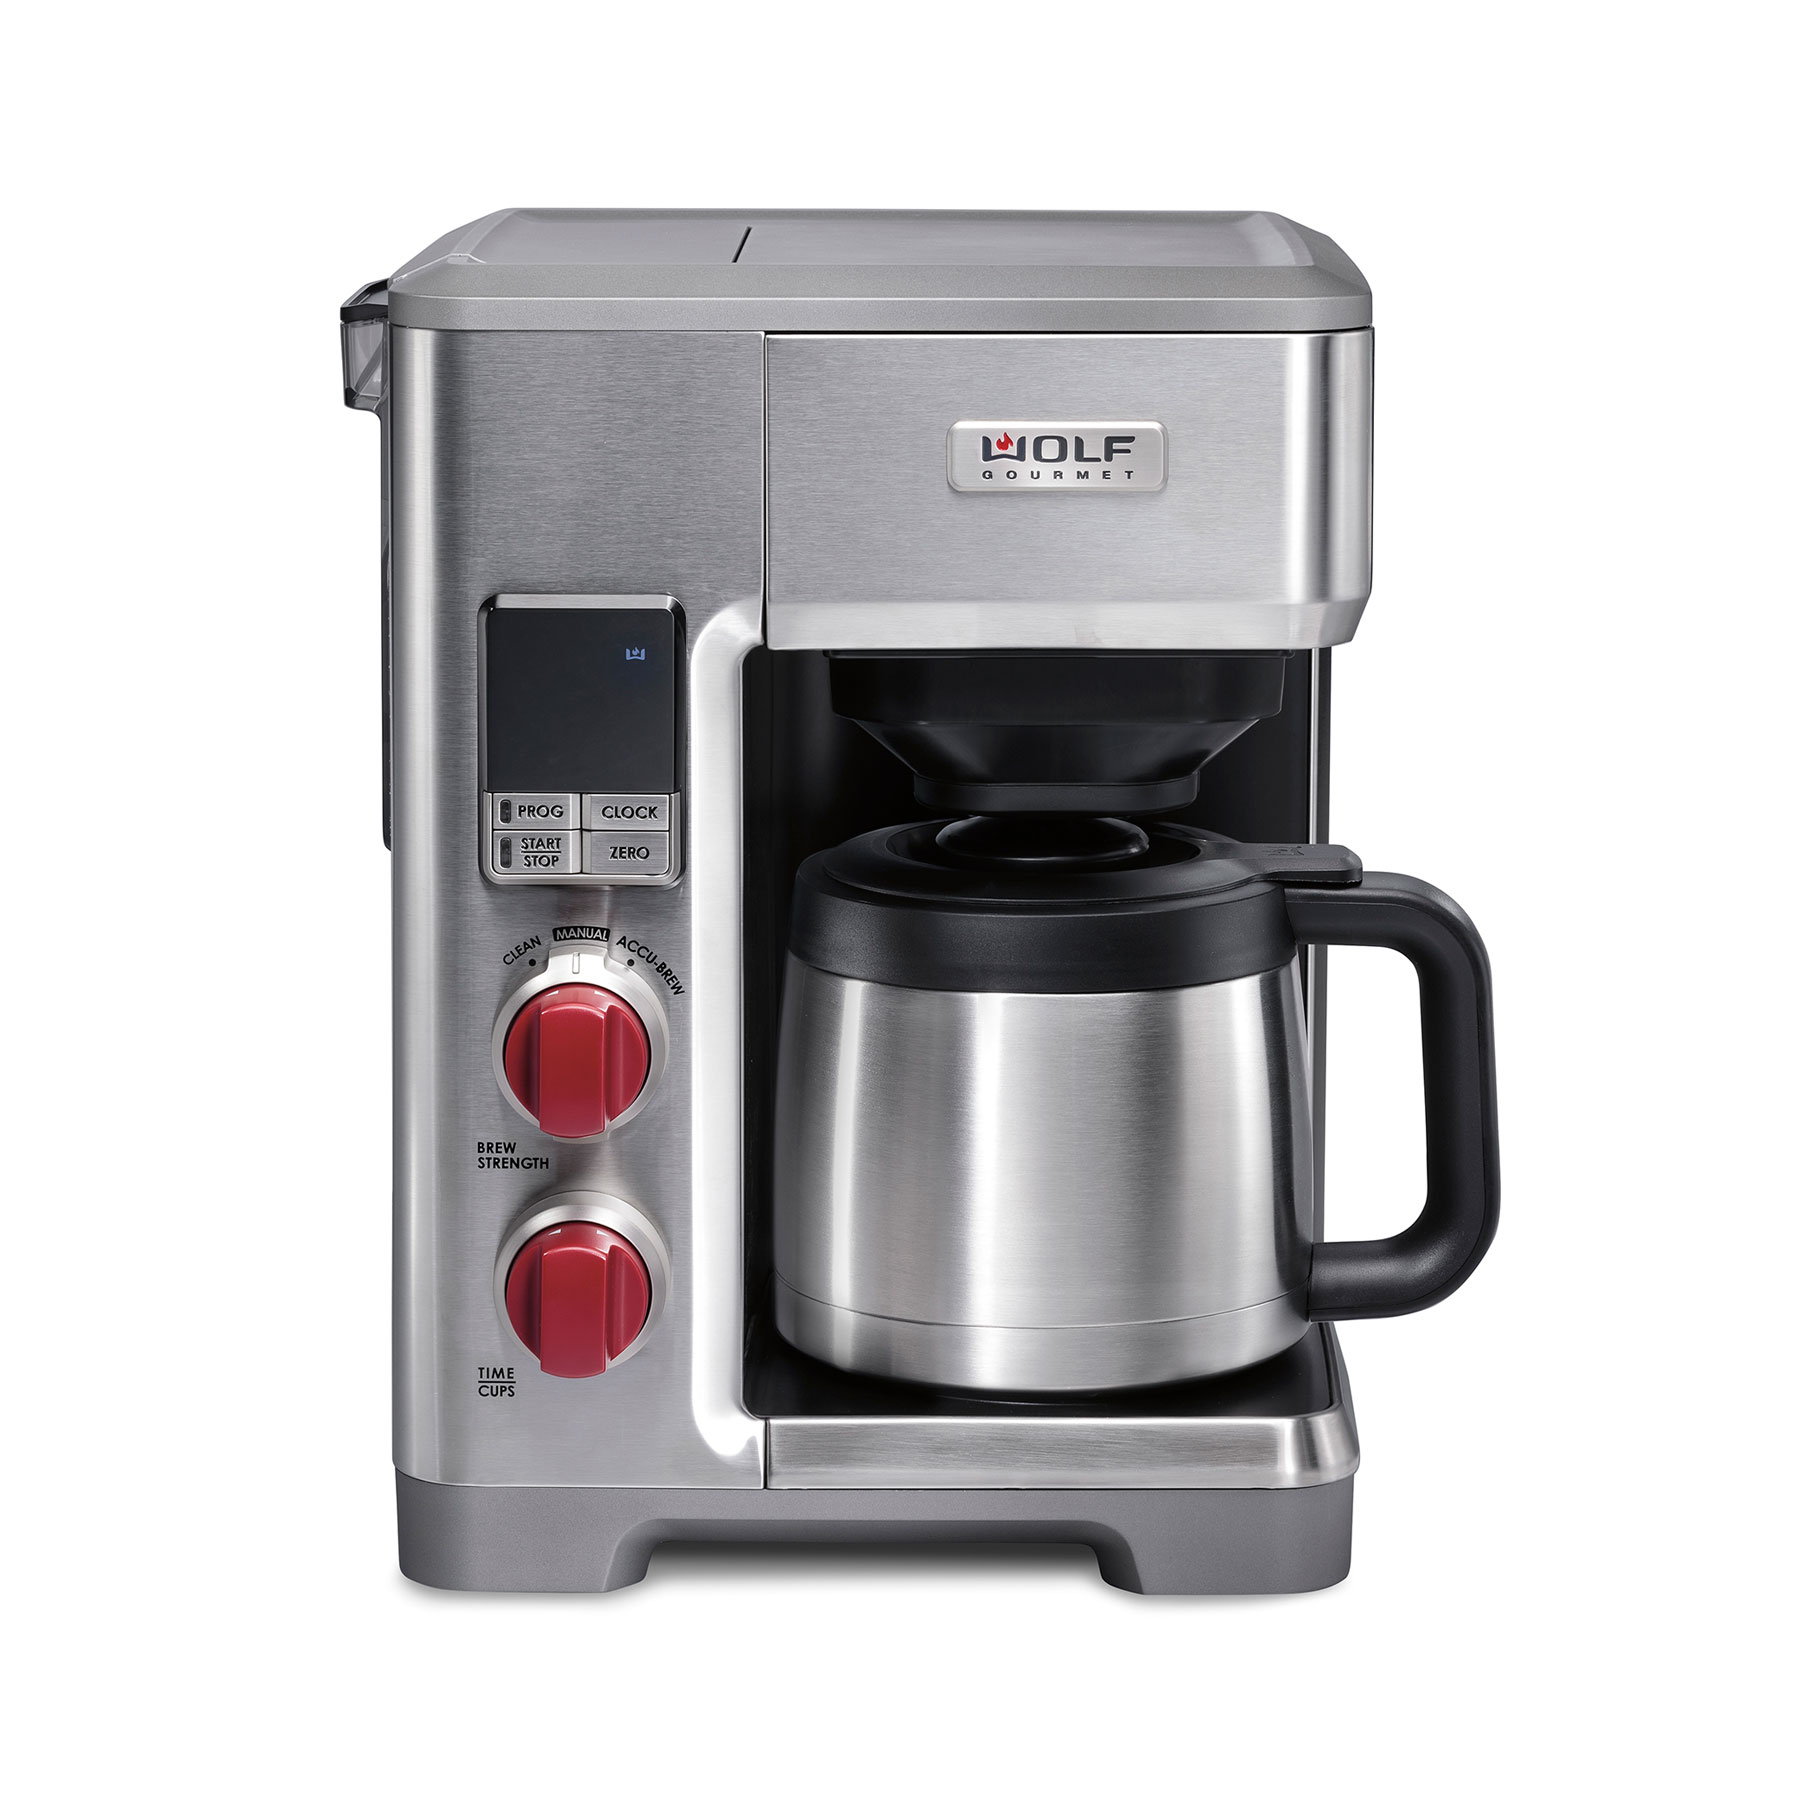 https://wolfgourmet.com/media/home-products/coffee-maker-home-front.jpg